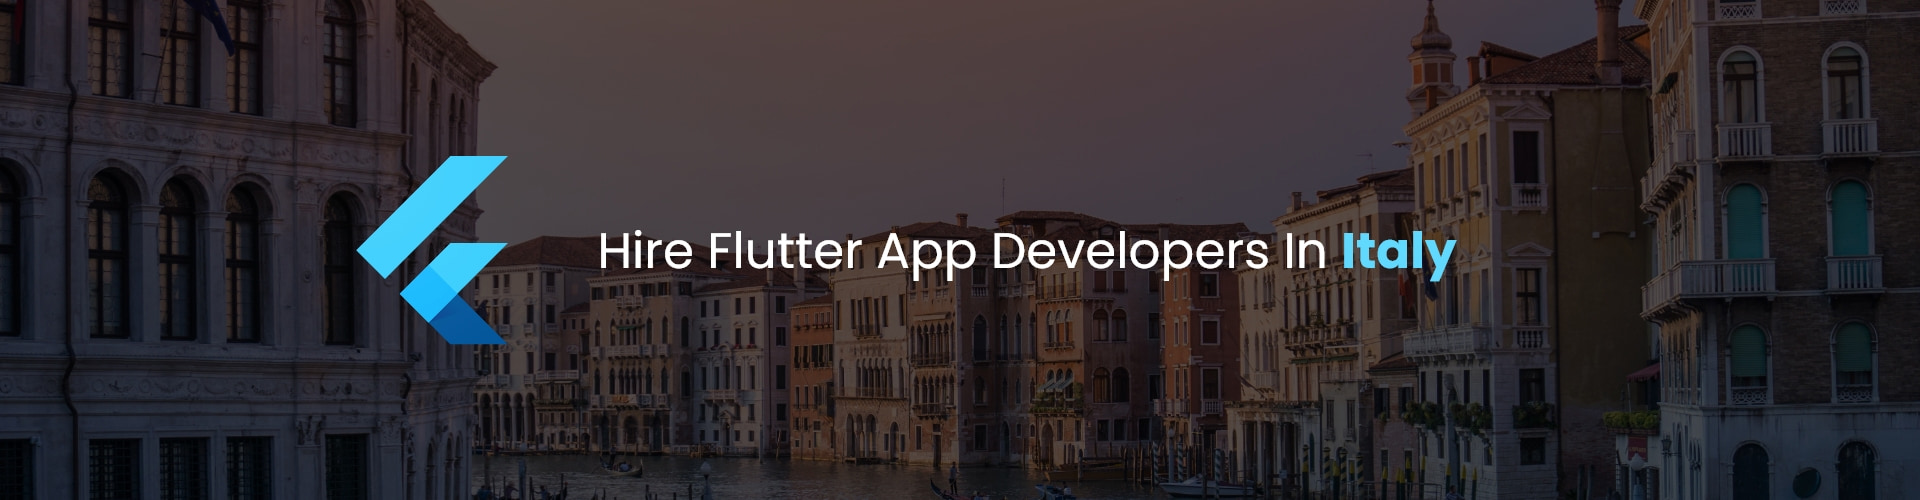 hire flutter app developers in italy